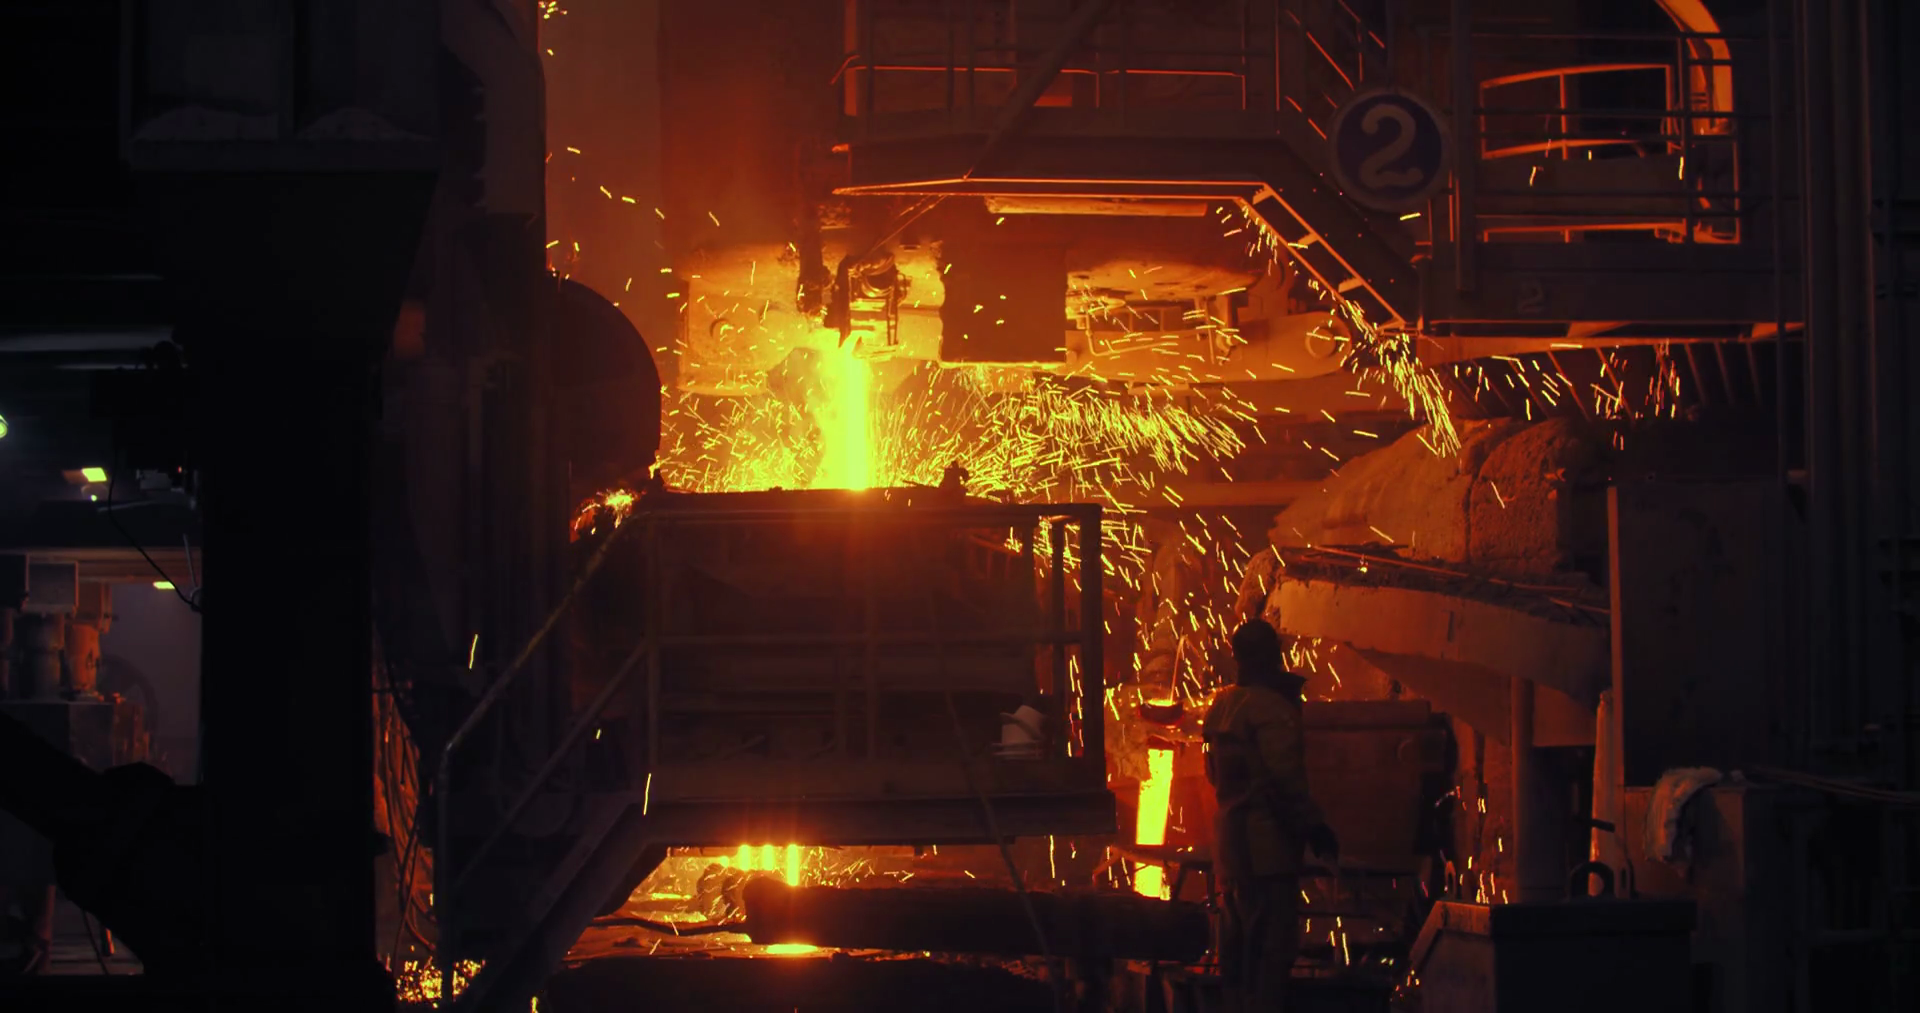 2022/05/videoblocks-hard-work-in-a-foundry-metal-smelting-furnace-in-steel-mill-molten-metal-pouring-metallurgy-steel-casting-foundry-steel-manufacturing-rgknvgcx8-thumbnail-1080-01